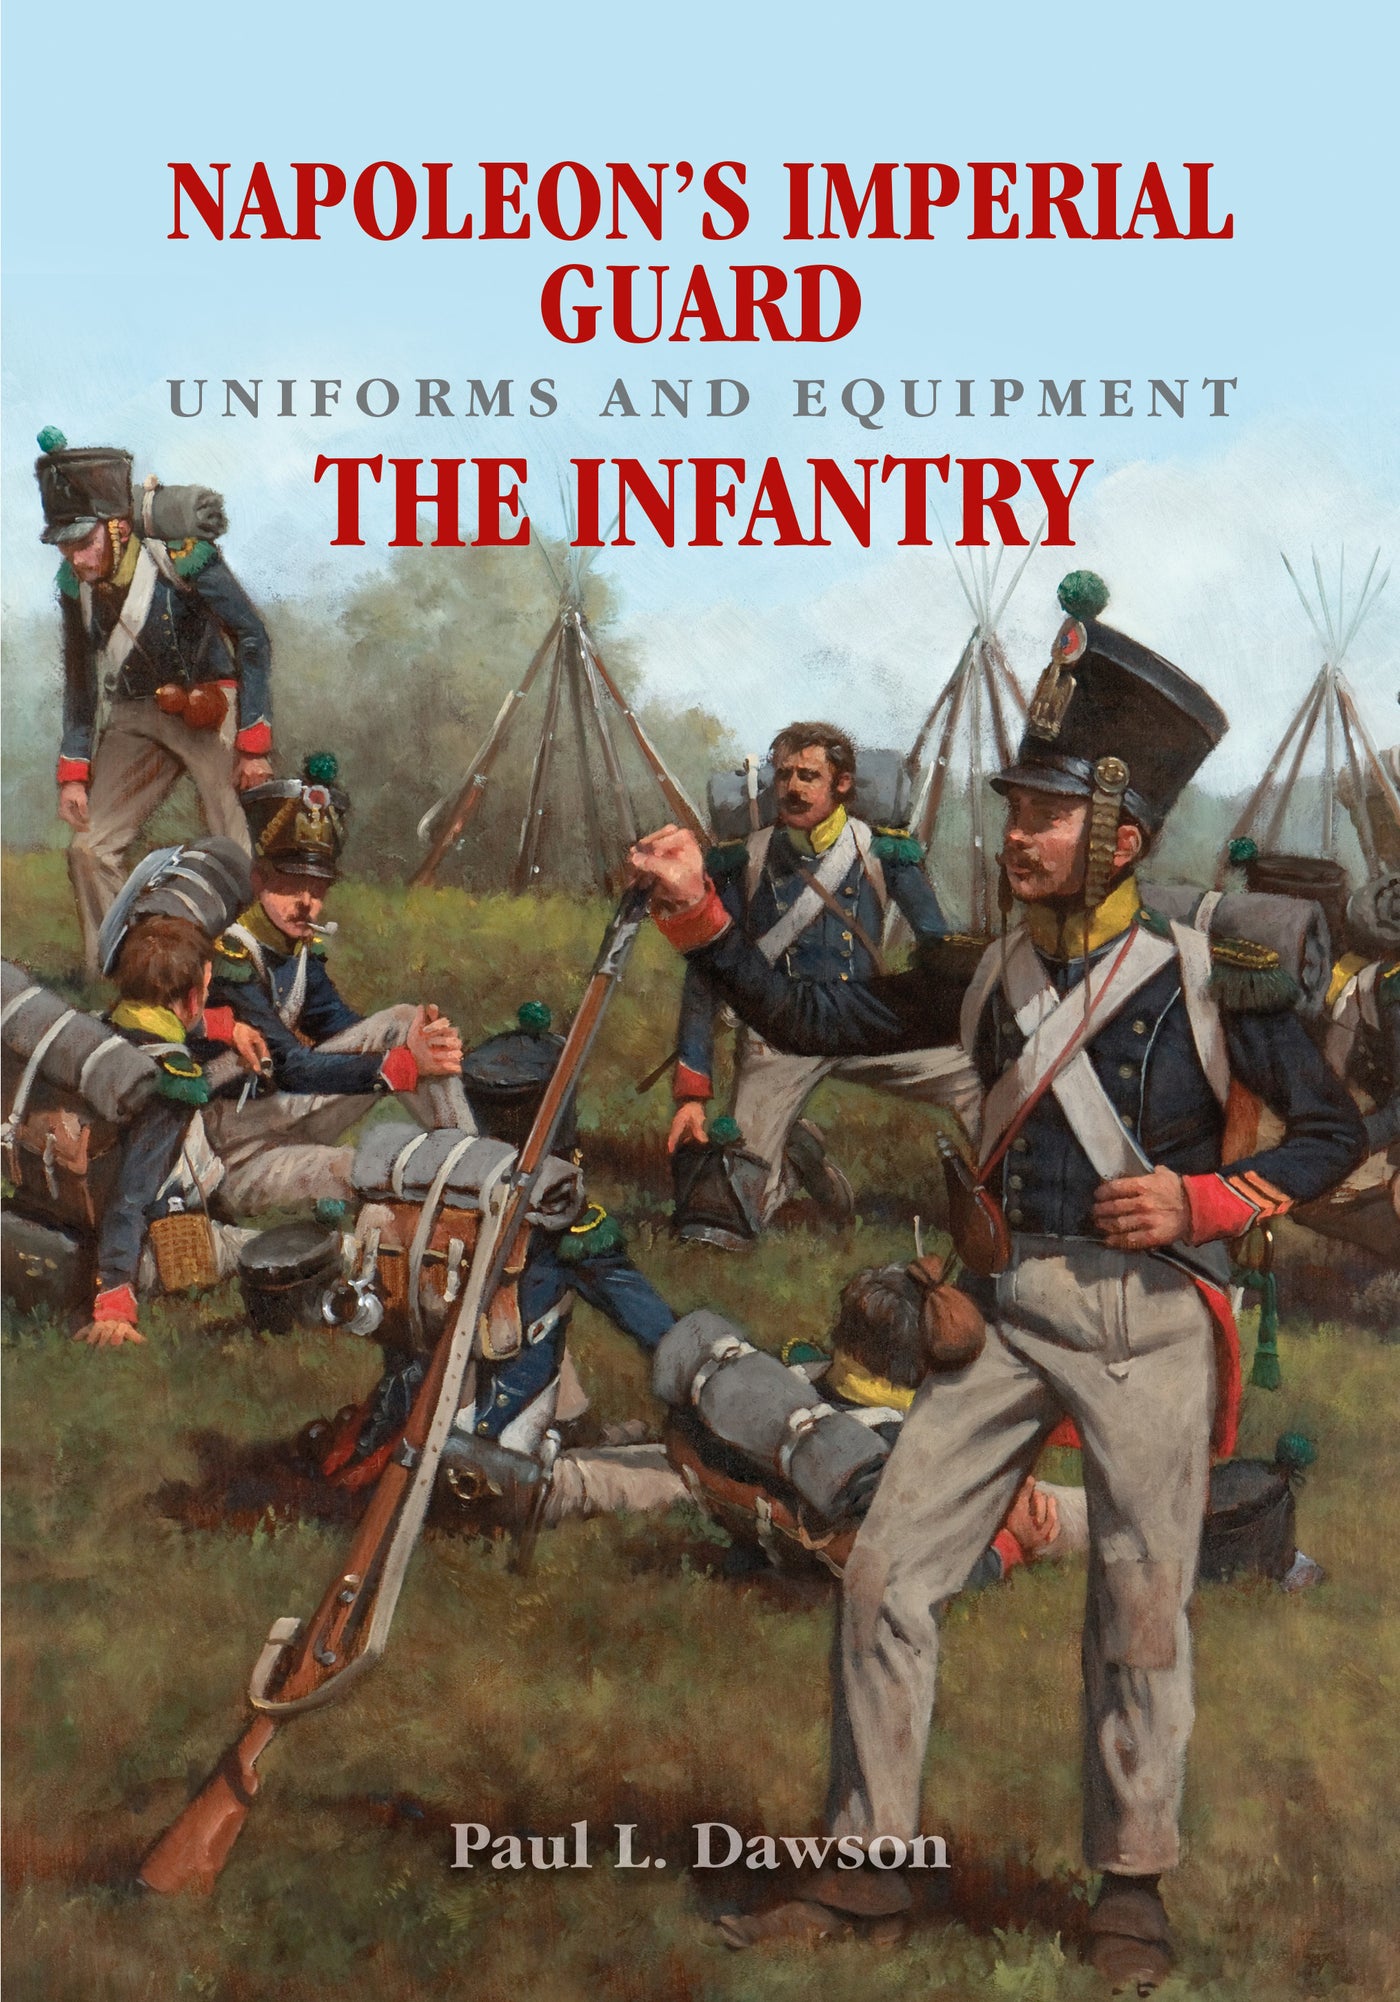 Napoleon's Imperial Guard Uniforms and Equipment. Volume 1